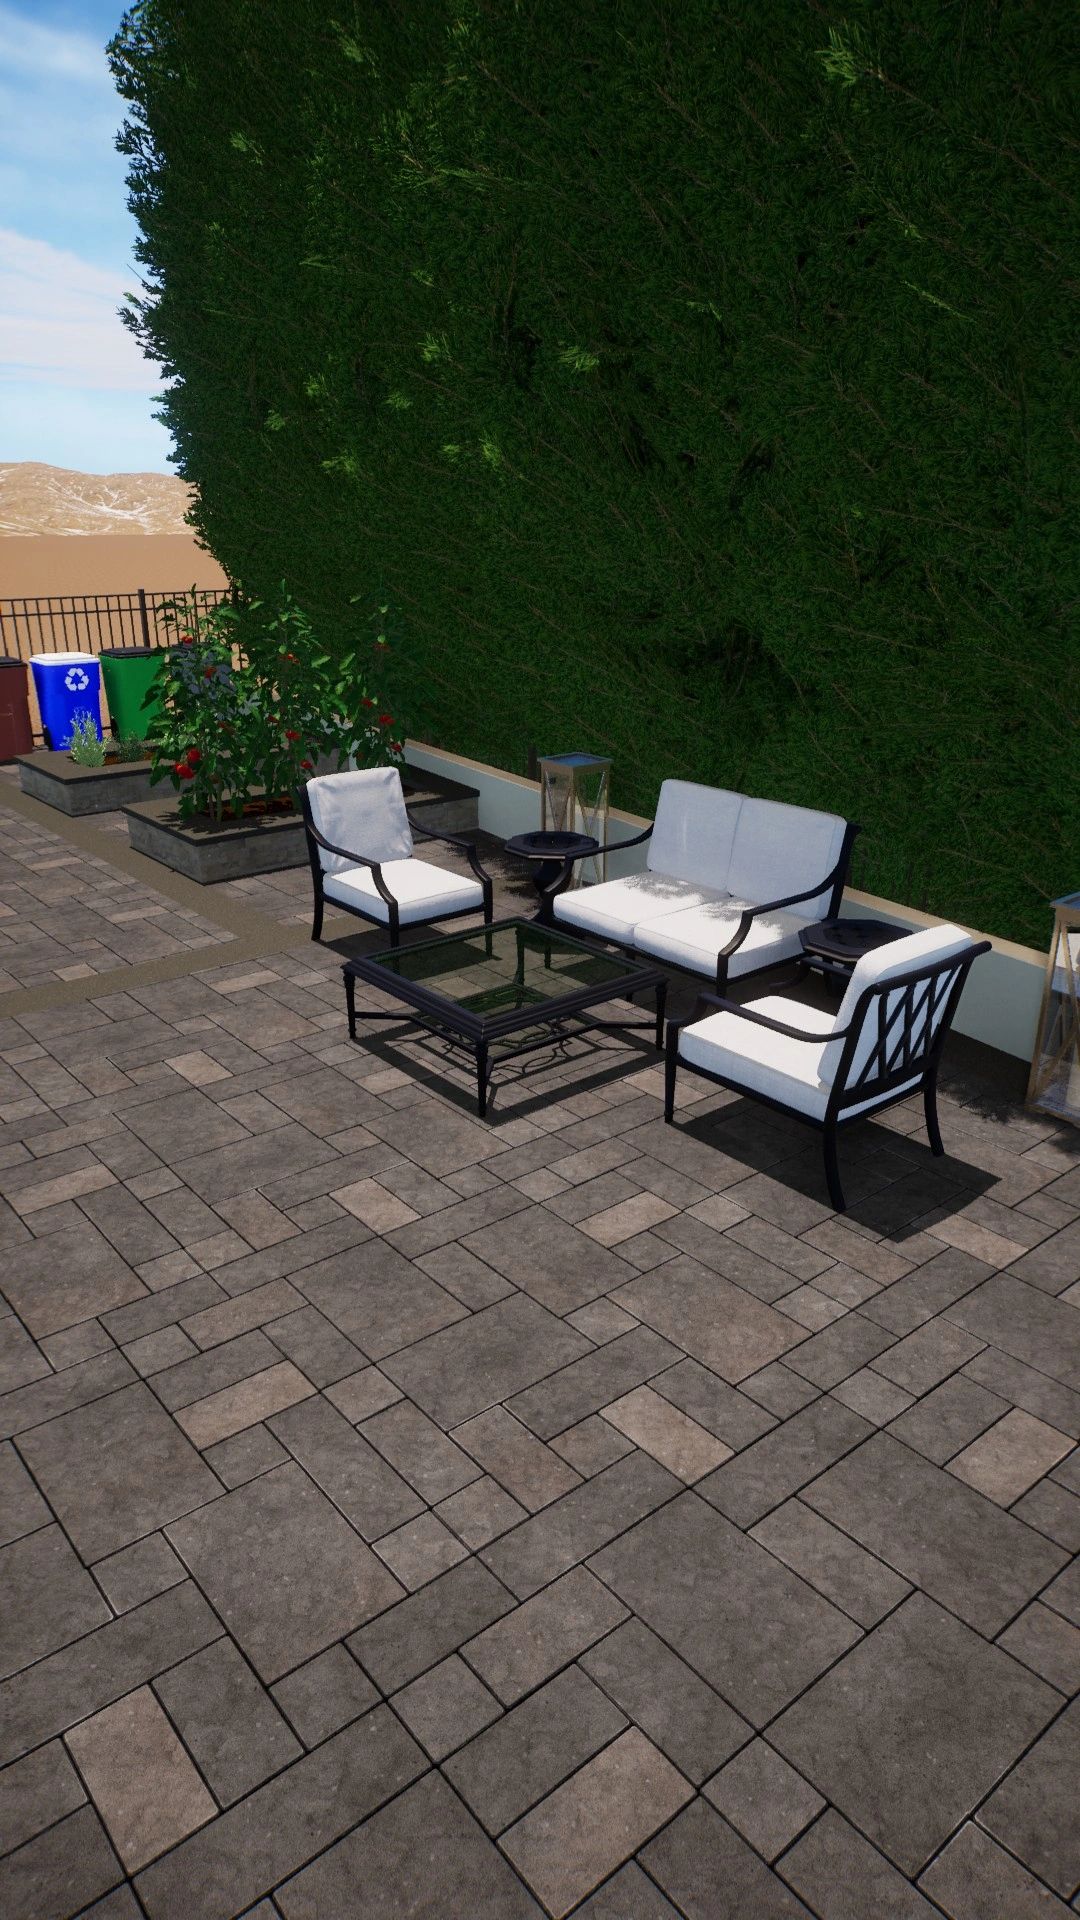 Small concrete garden boxes and outdoor sitting area.